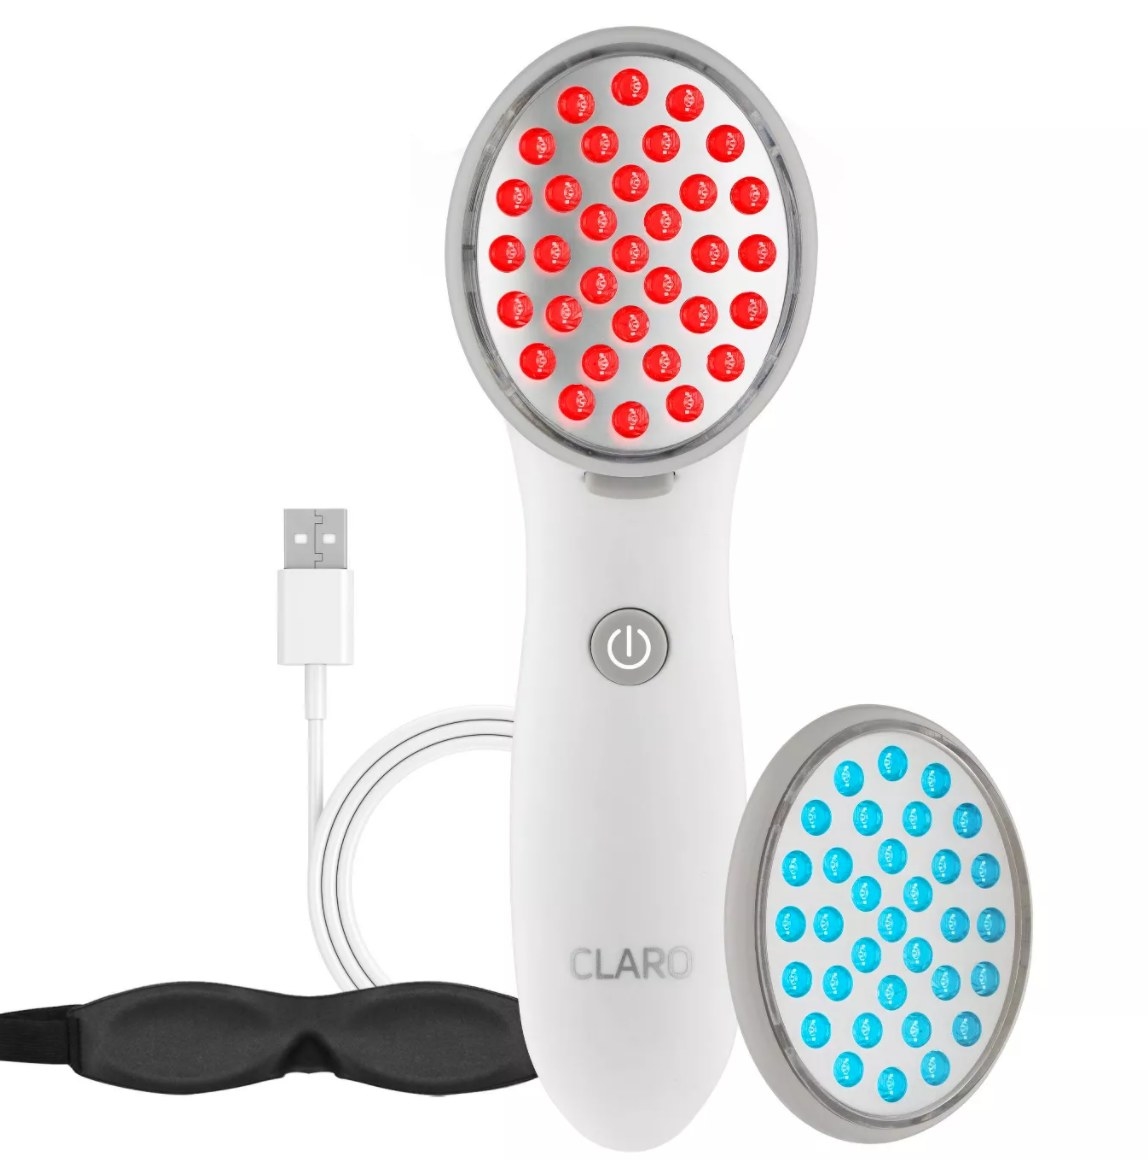 Spa Sciences Claro Acne Treatment Light Therapy System against white background